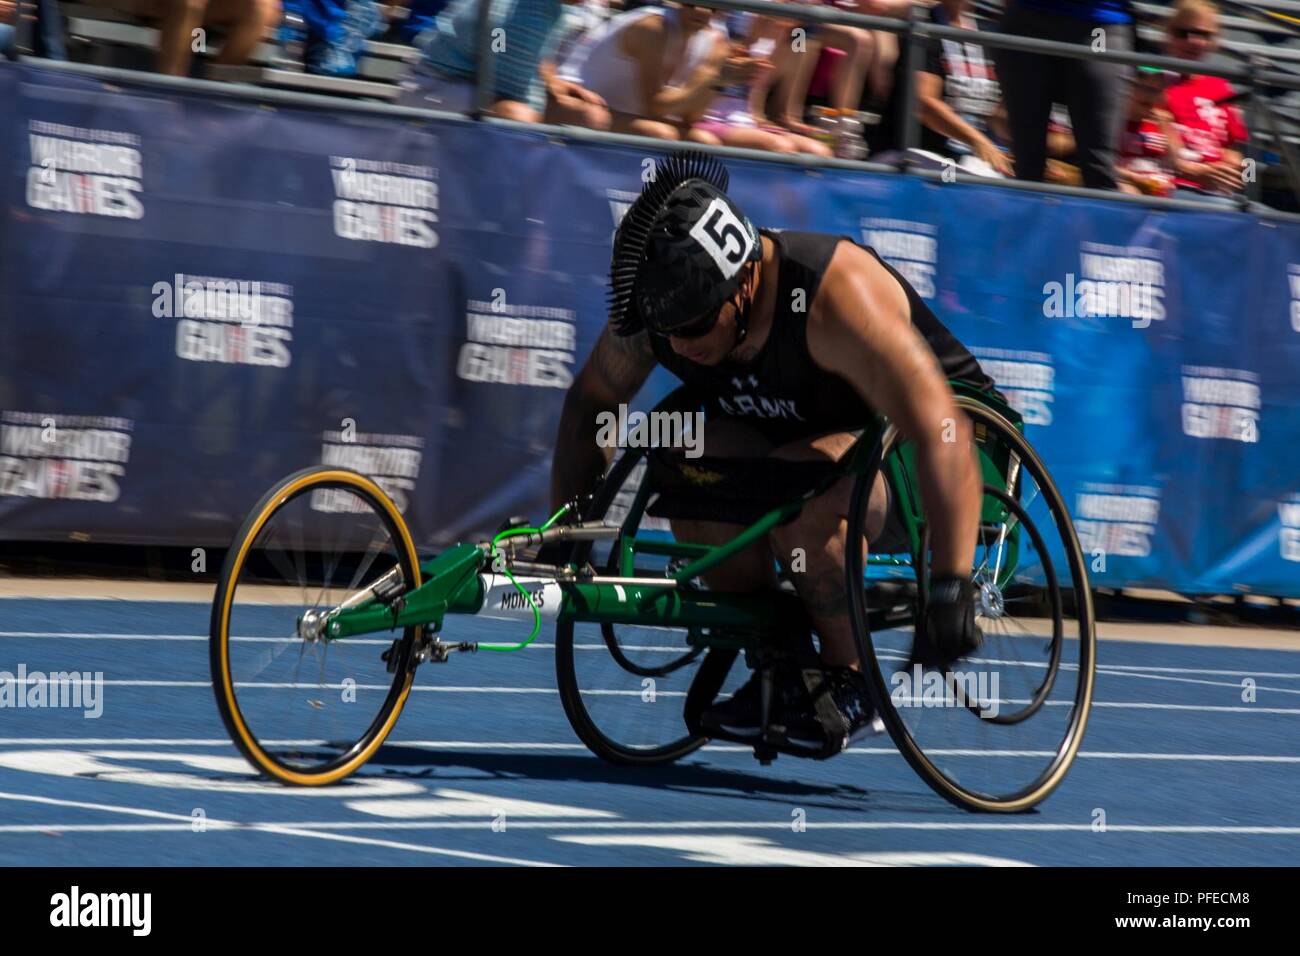 U.S. Army Staff Sgt. Chris Montes, a Team Army competitor, competes in track at the United States Air Force Academy, Colorado Springs, Colorado, June 2, 2018. The DoD Warrior Games is an adaptive sports competition for wounded, ill, and injured service members and veterans. Approximately 300 athletes representing teams from the Army, Navy, Air Force, Special Operations Command, United Kingdom Armed Forces, Canadian Armed Forces, and the Australian Defence Force will compete June 1 - June 9 in archery, cycling, track, field,shooting, sitting volleyball, swimming, wheelchair basketball, and - ne Stock Photo